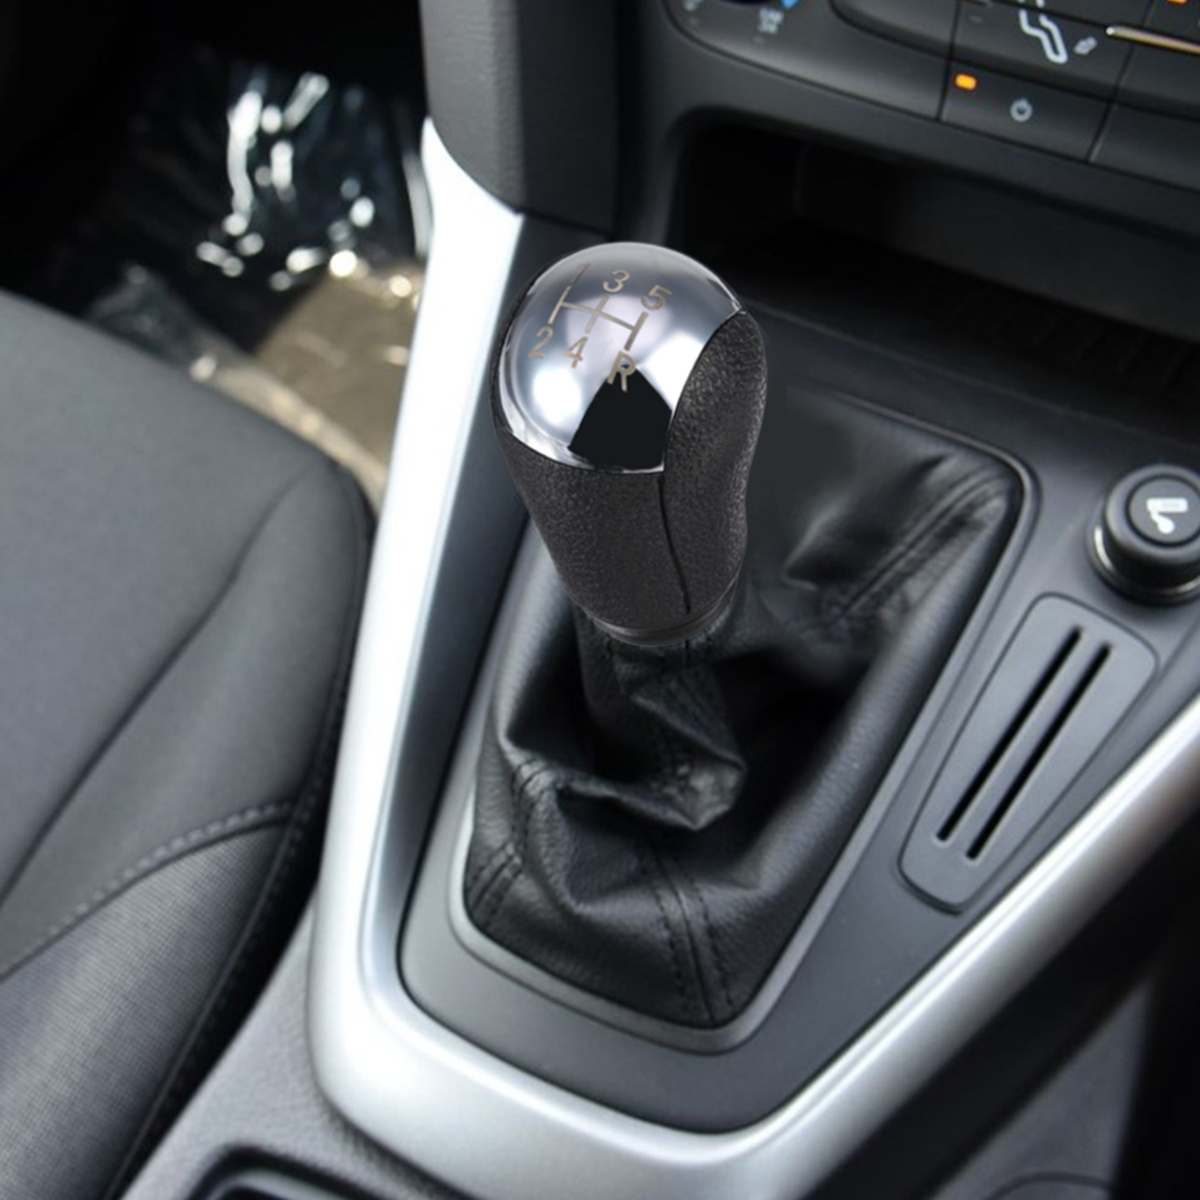 5 Speed MT Gear Shift Knob with Dust Boot Cover for Ford Focus Mondeo Galaxy Transit Fiesta Mustang